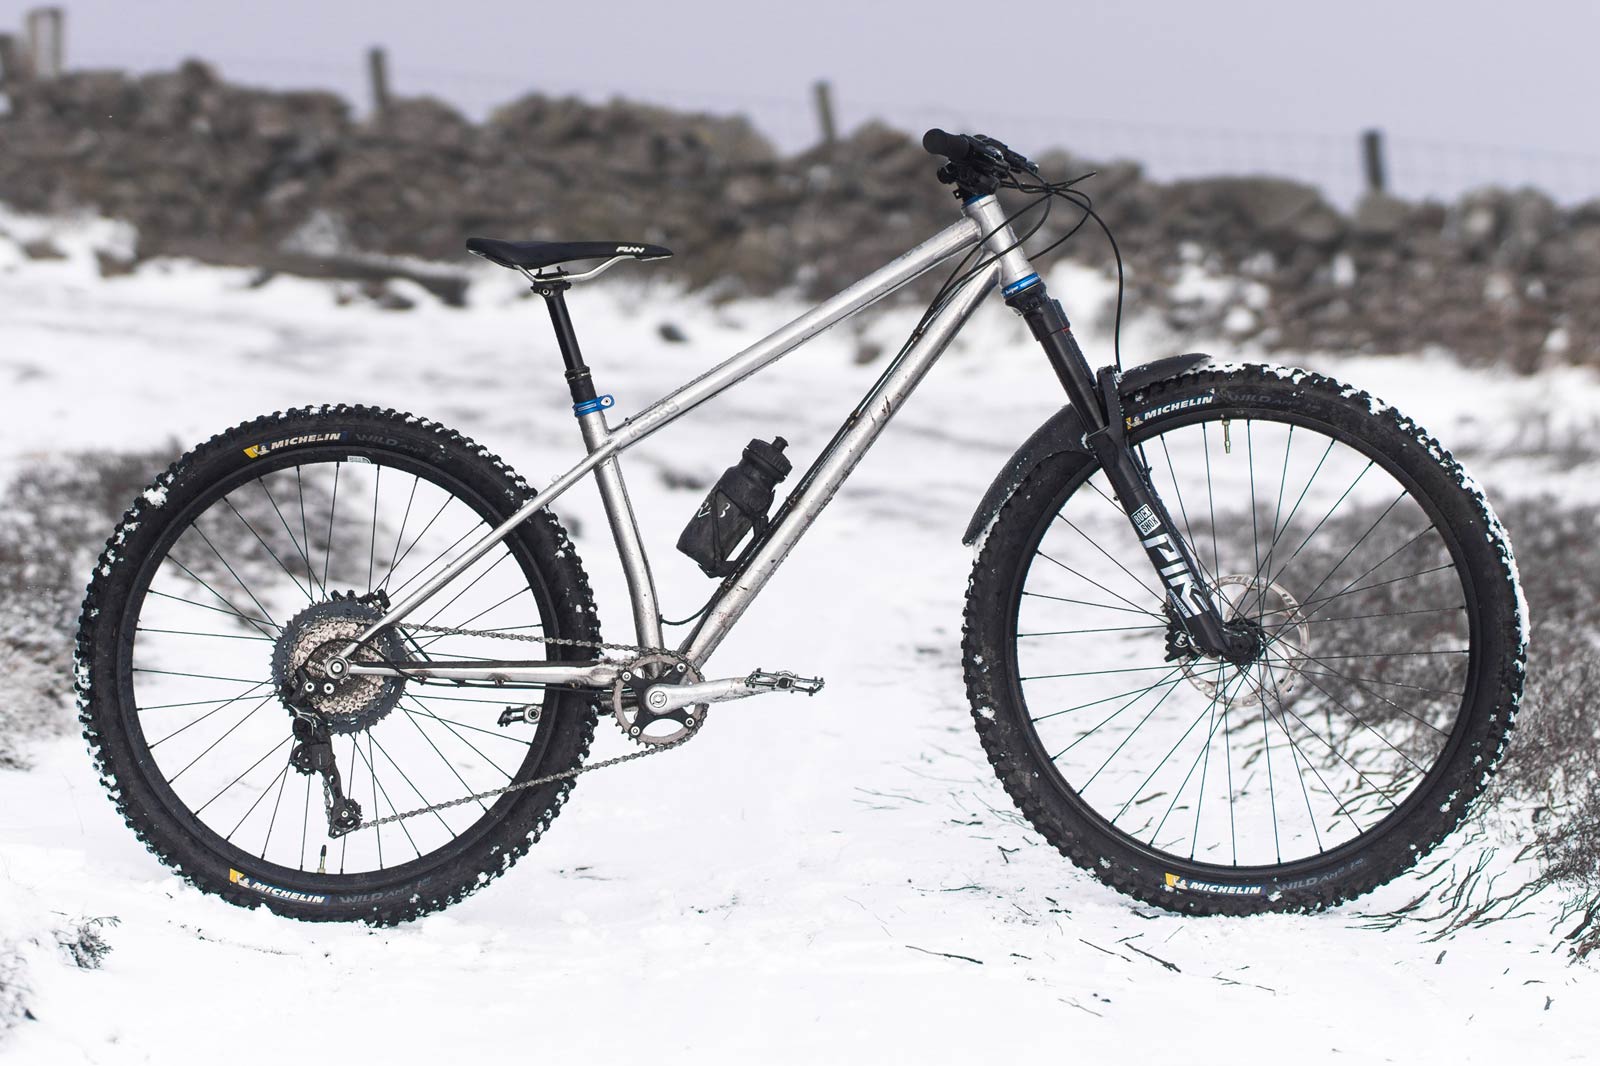 starling roost mullet hardtail review stainless steel frame golfy scotland